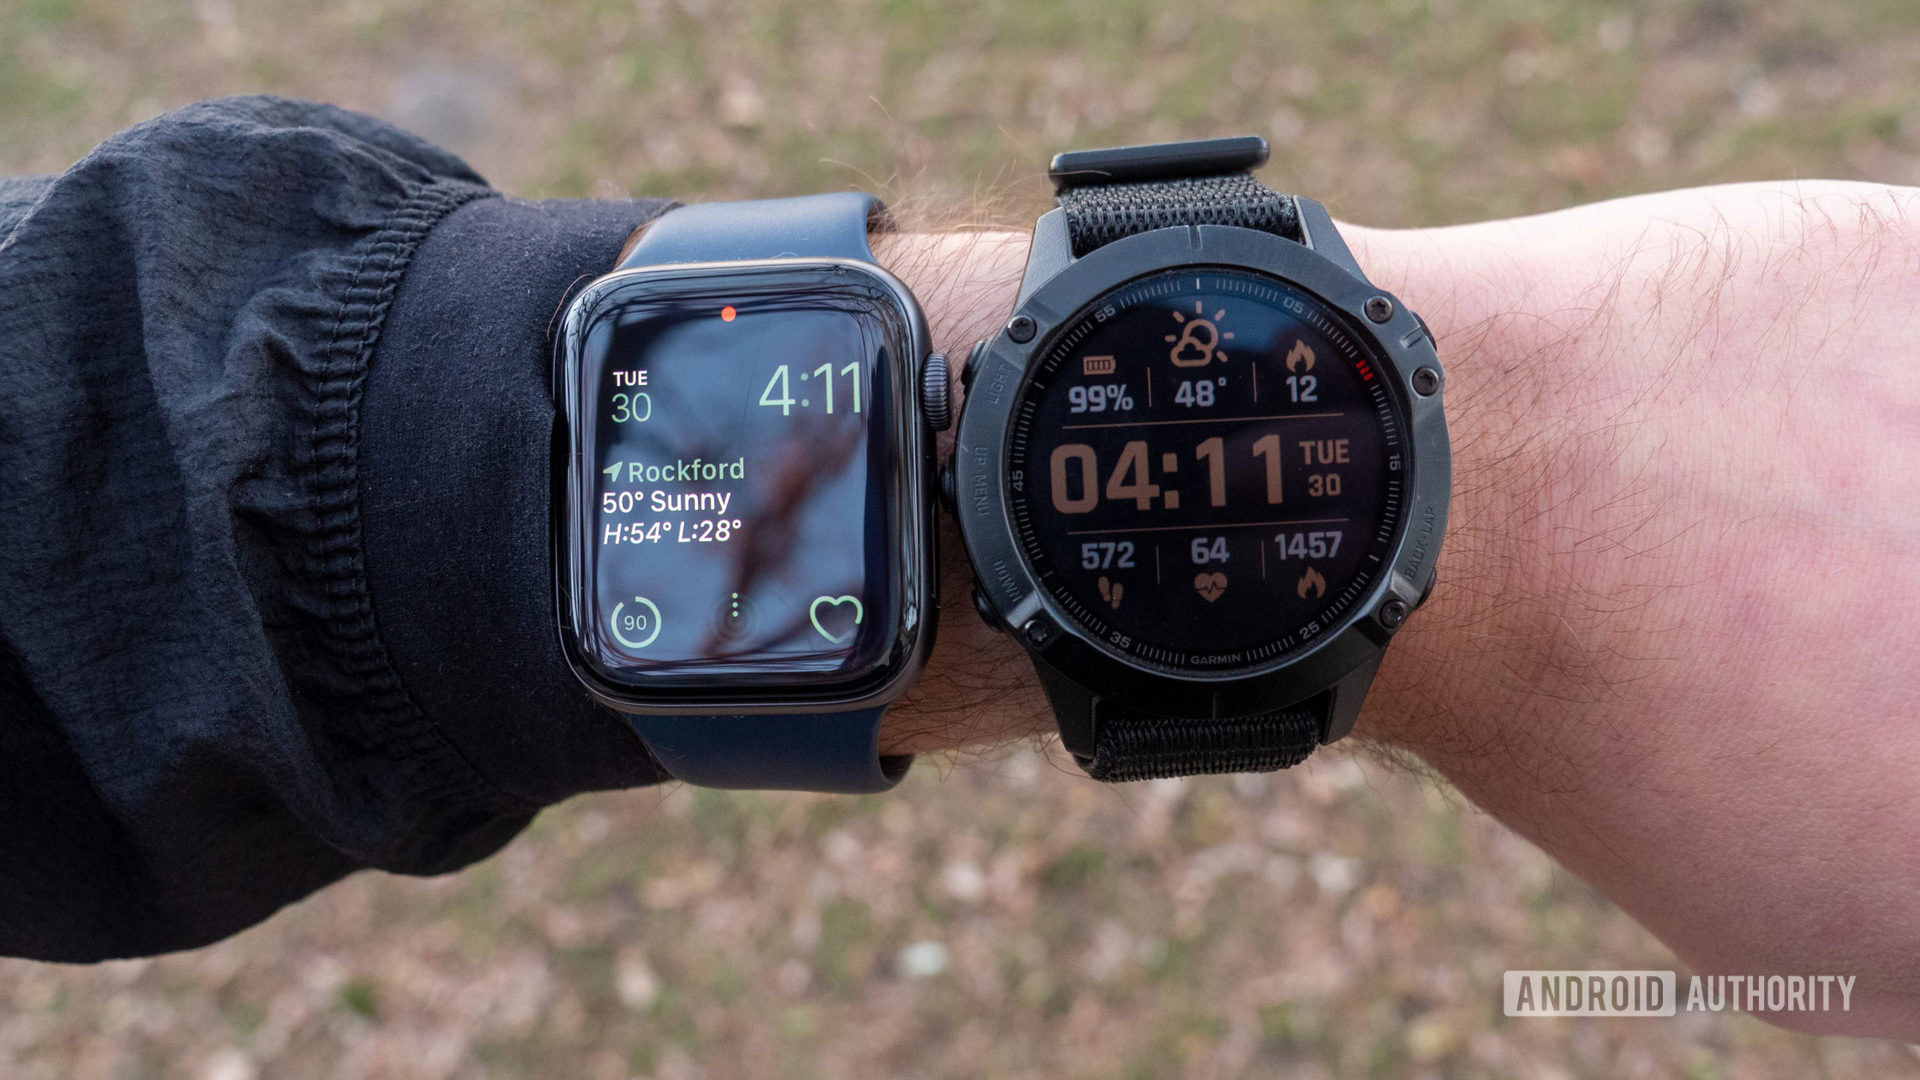 From Apple Watch to Garmin Fenix 6 - After 5 years with an Apple